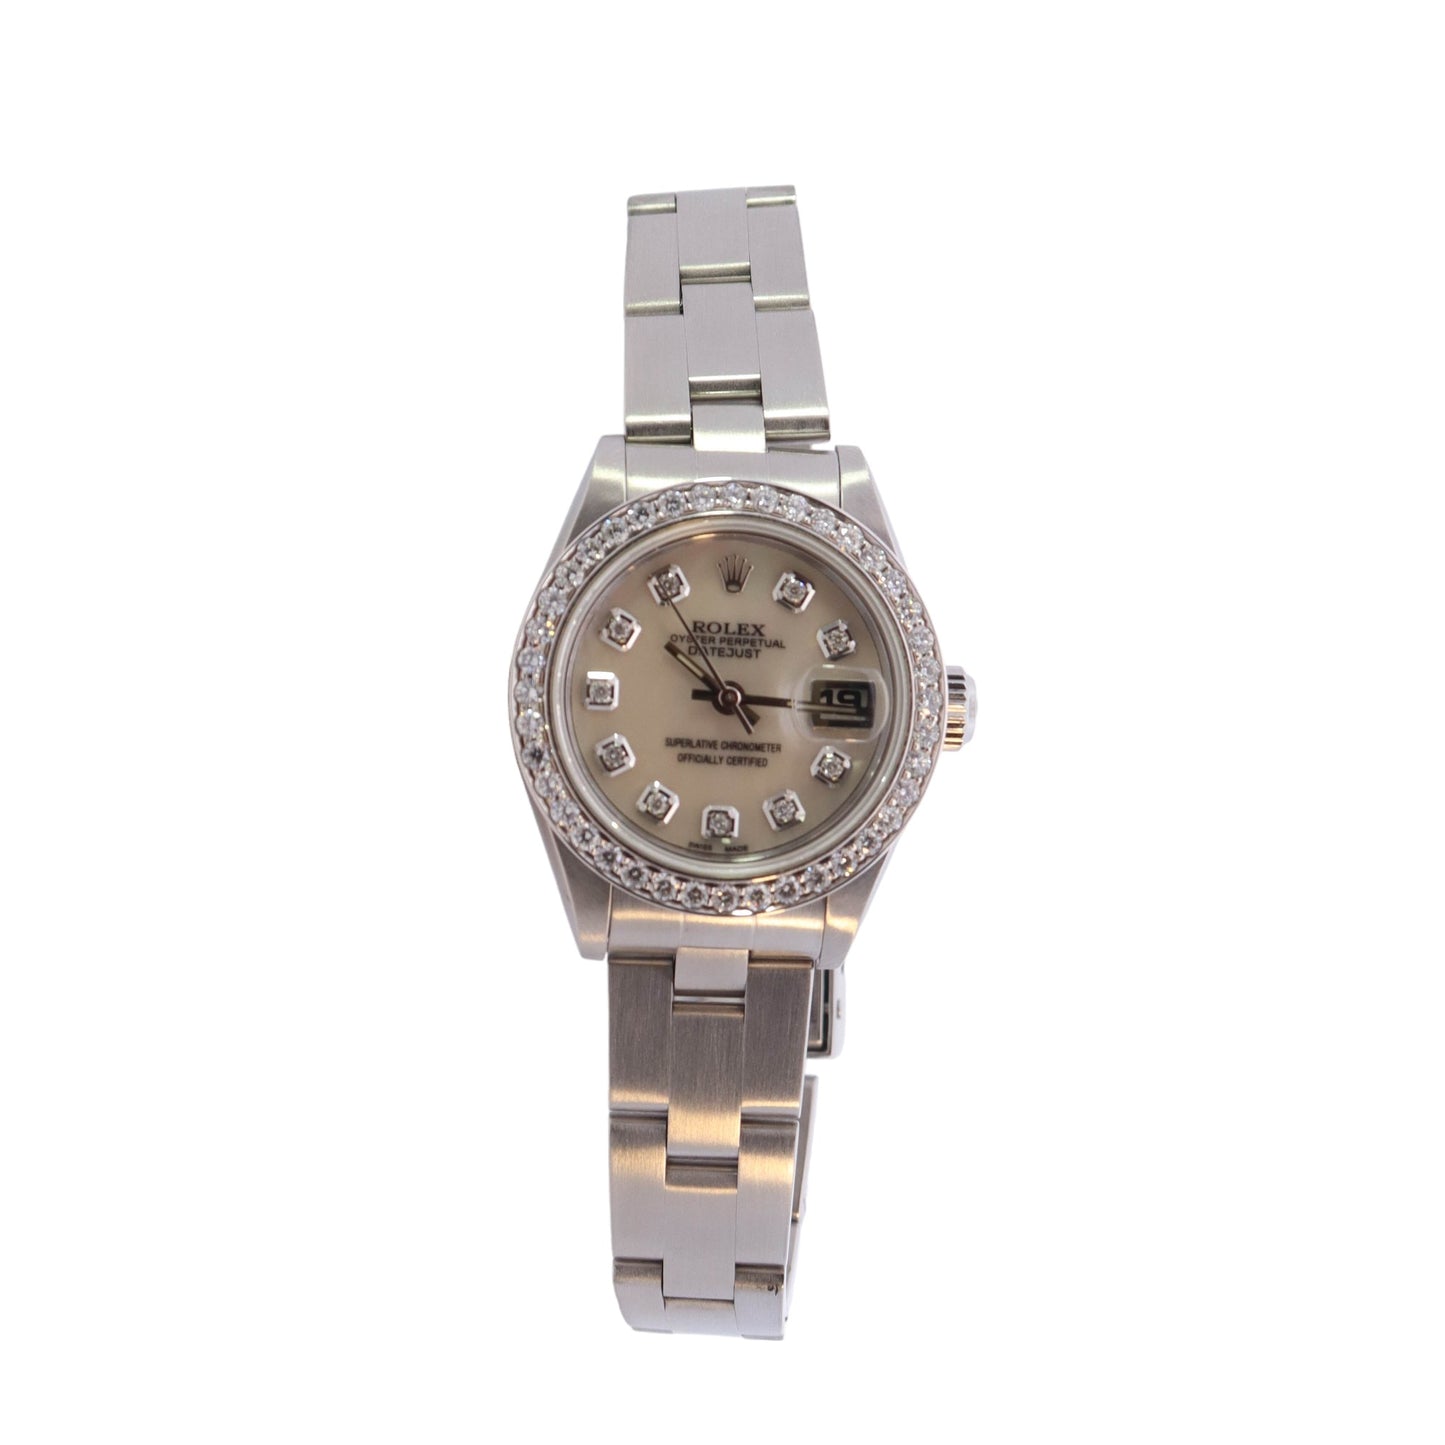 Rolex Oyster Perpetual Date Stainless Steel 26mm White MOP Diamond Dial Watch  Reference #: 79190 - Happy Jewelers Fine Jewelry Lifetime Warranty